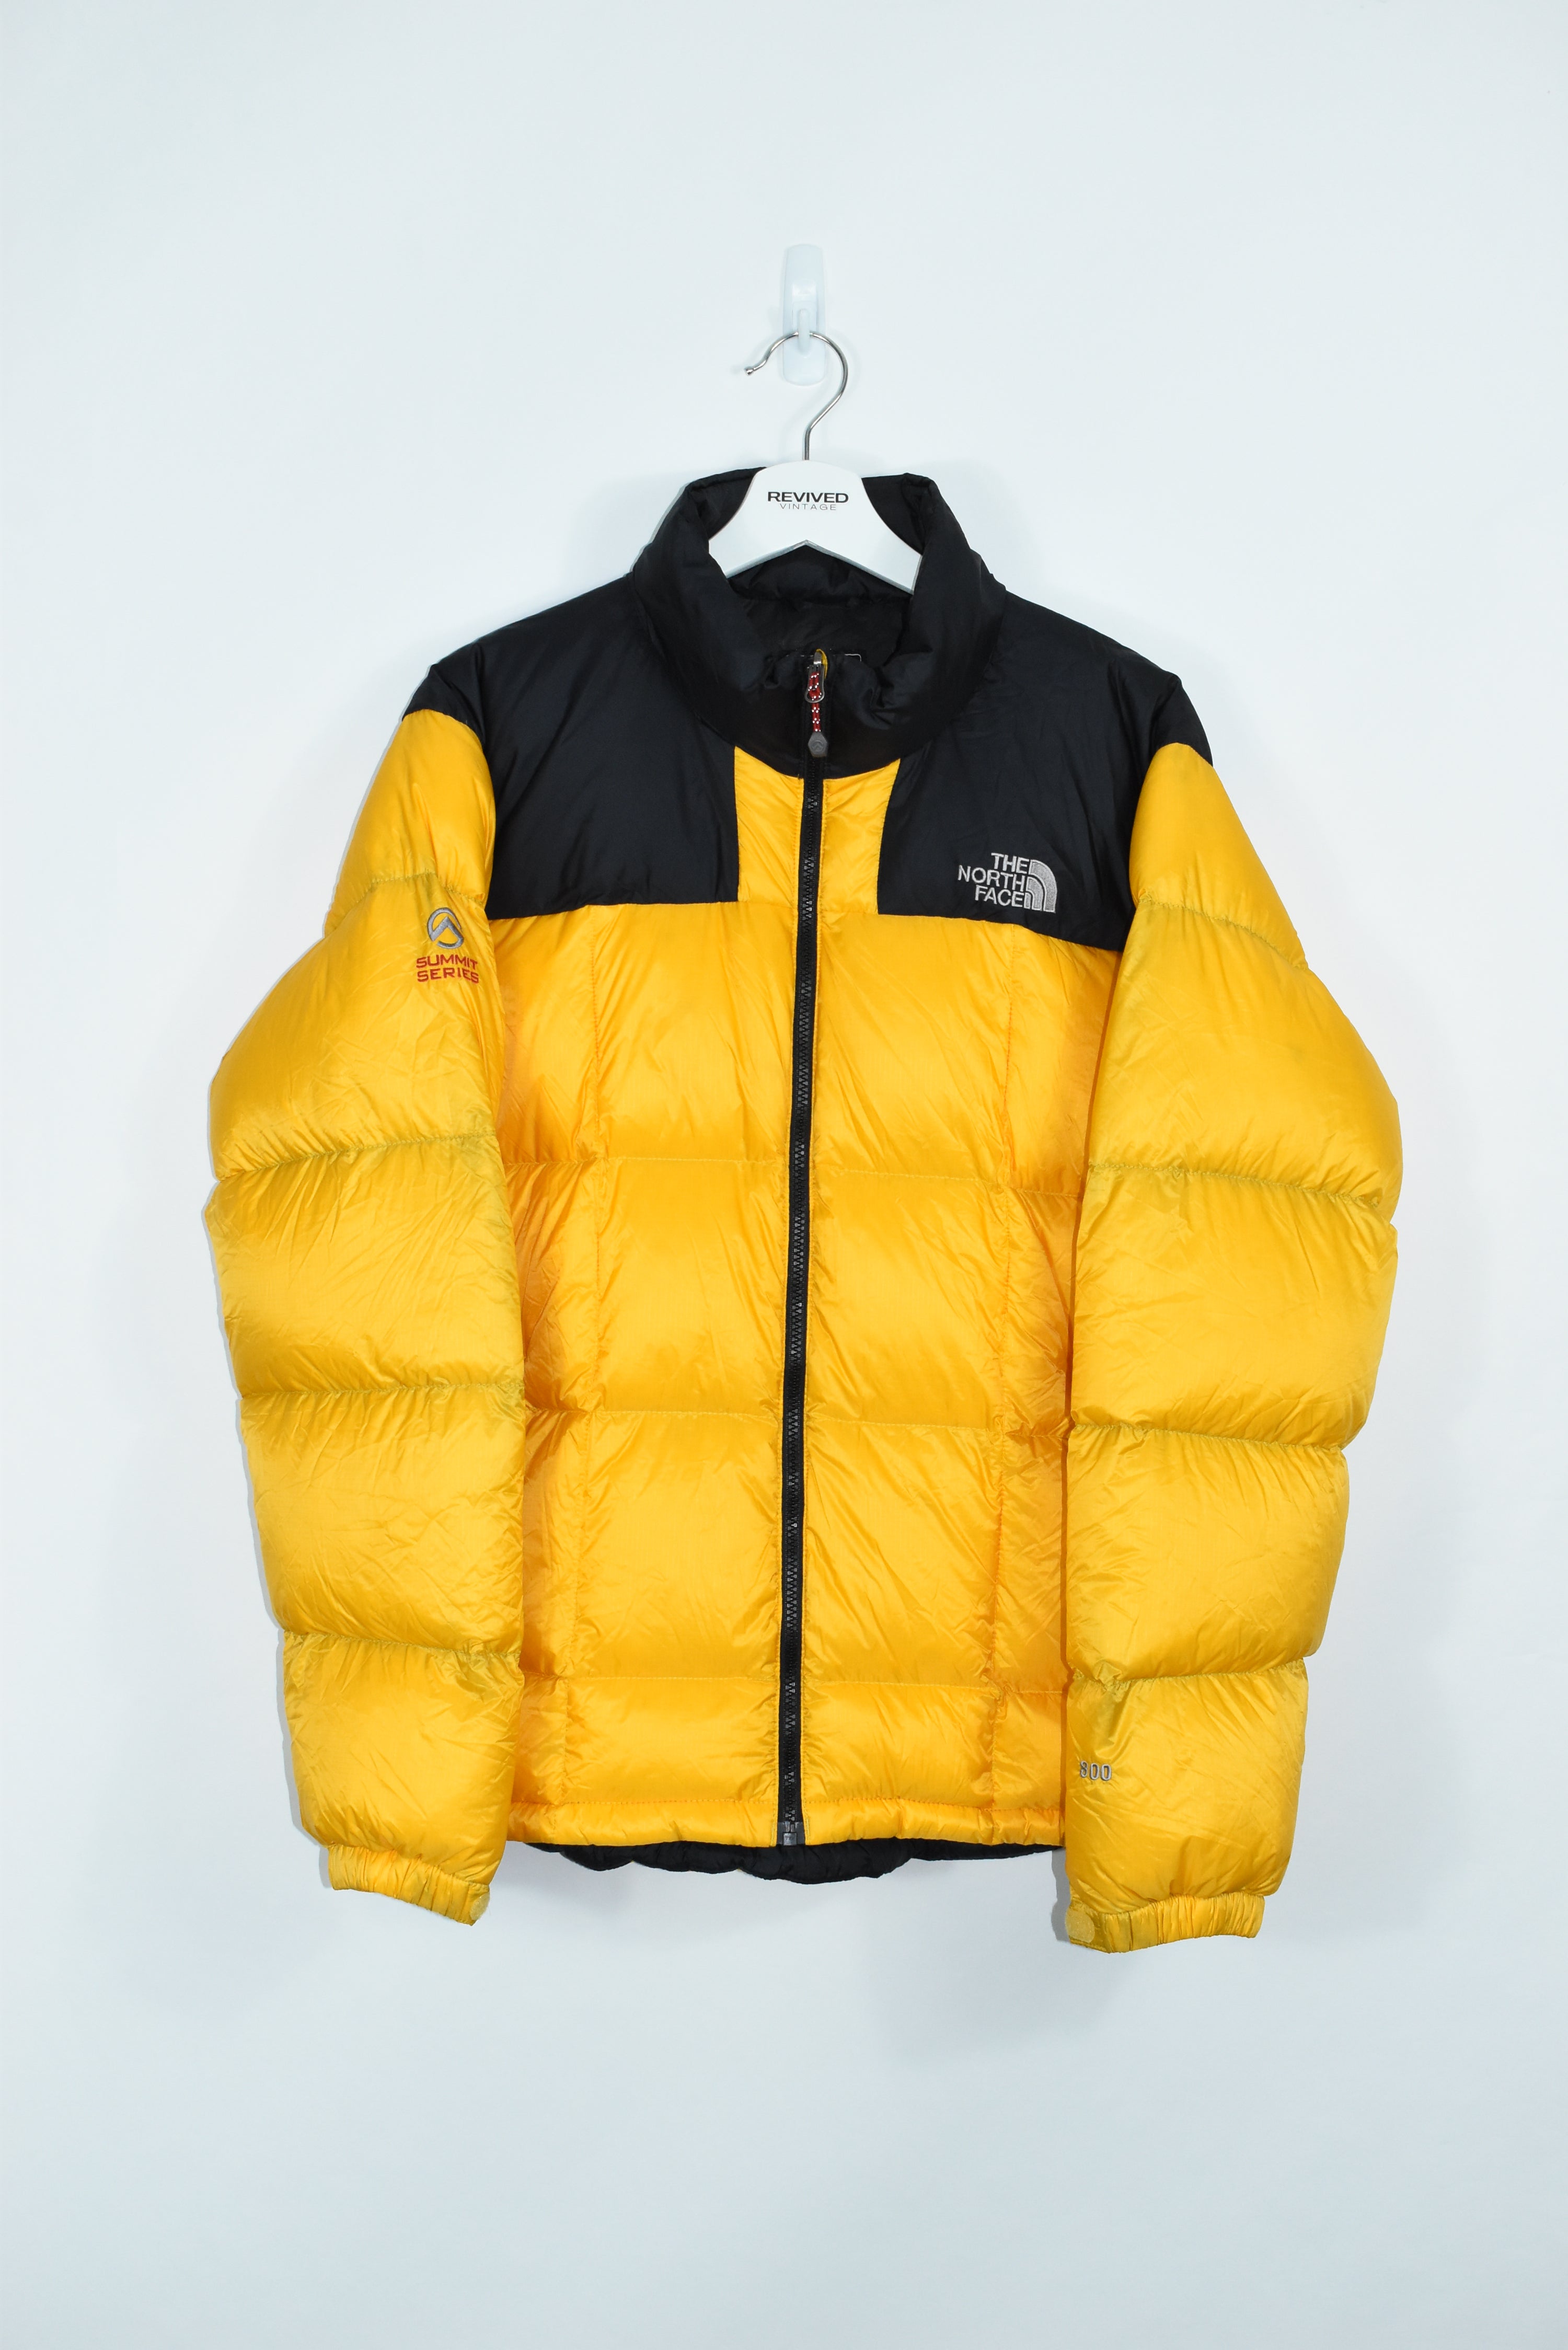 Vintage North Face Yellow Puffer 800 Sumit Series LARGE (Baggy)